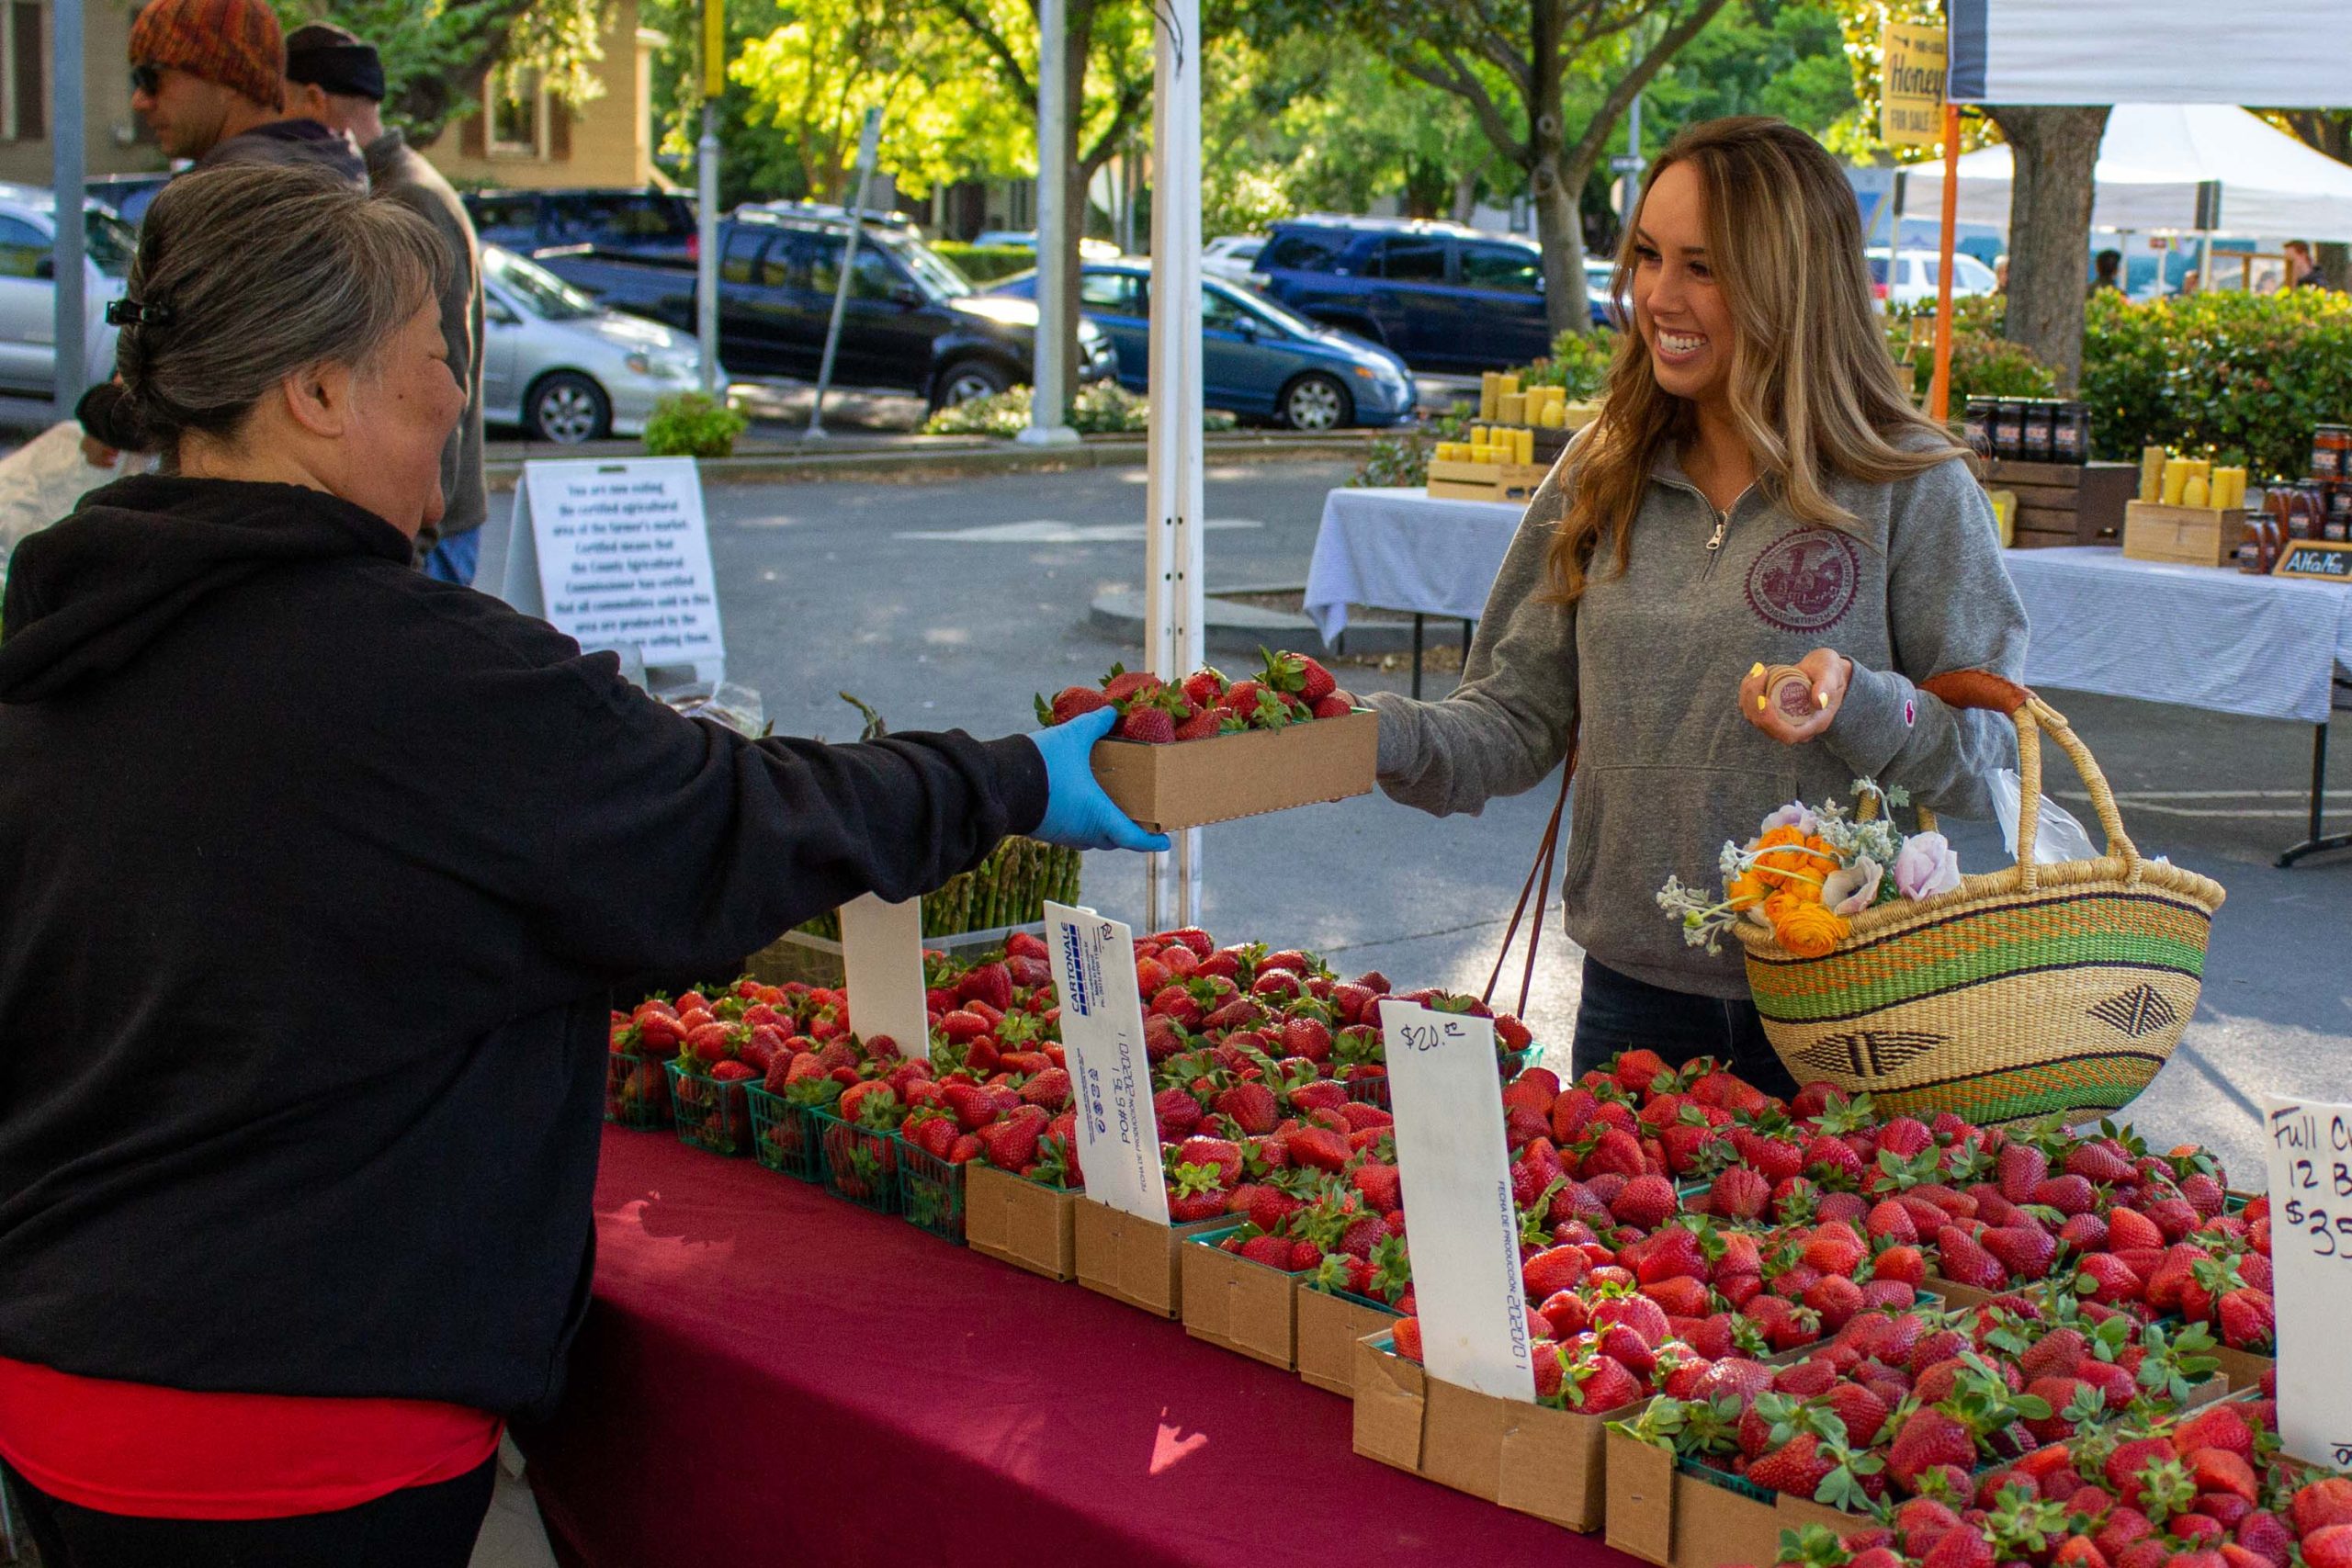 A student using food stamps to purchase fruit at a farmer's market.